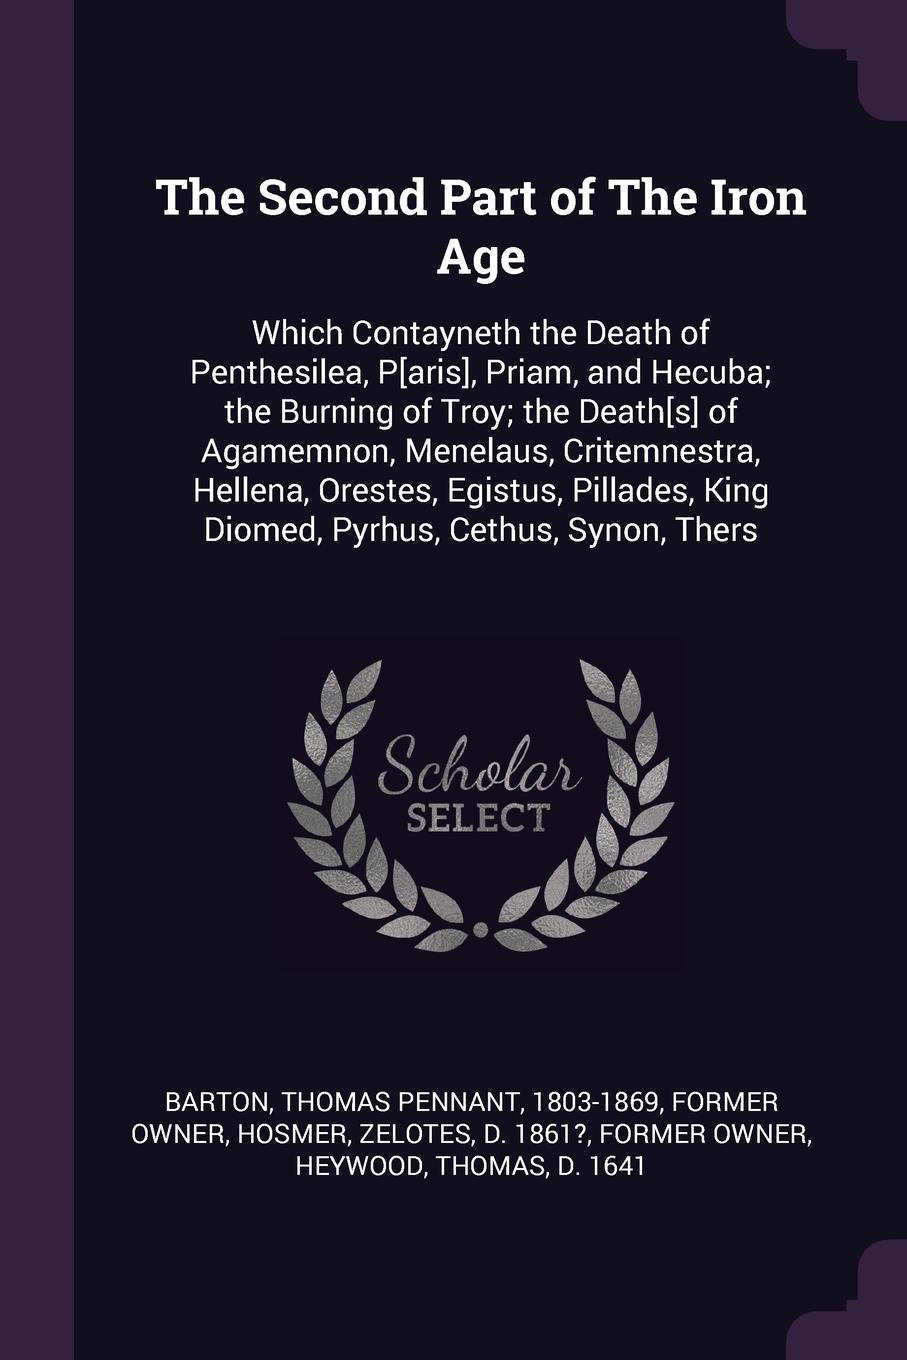 The Second Part of The Iron Age. Which Contayneth the Death of Penthesilea, P.aris., Priam, and Hecuba; the Burning of Troy; the Death.s. of Agamemnon, Menelaus, Critemnestra, Hellena, Orestes, Egistus, Pillades, King Diomed, Pyrhus, Cethus, Synon...